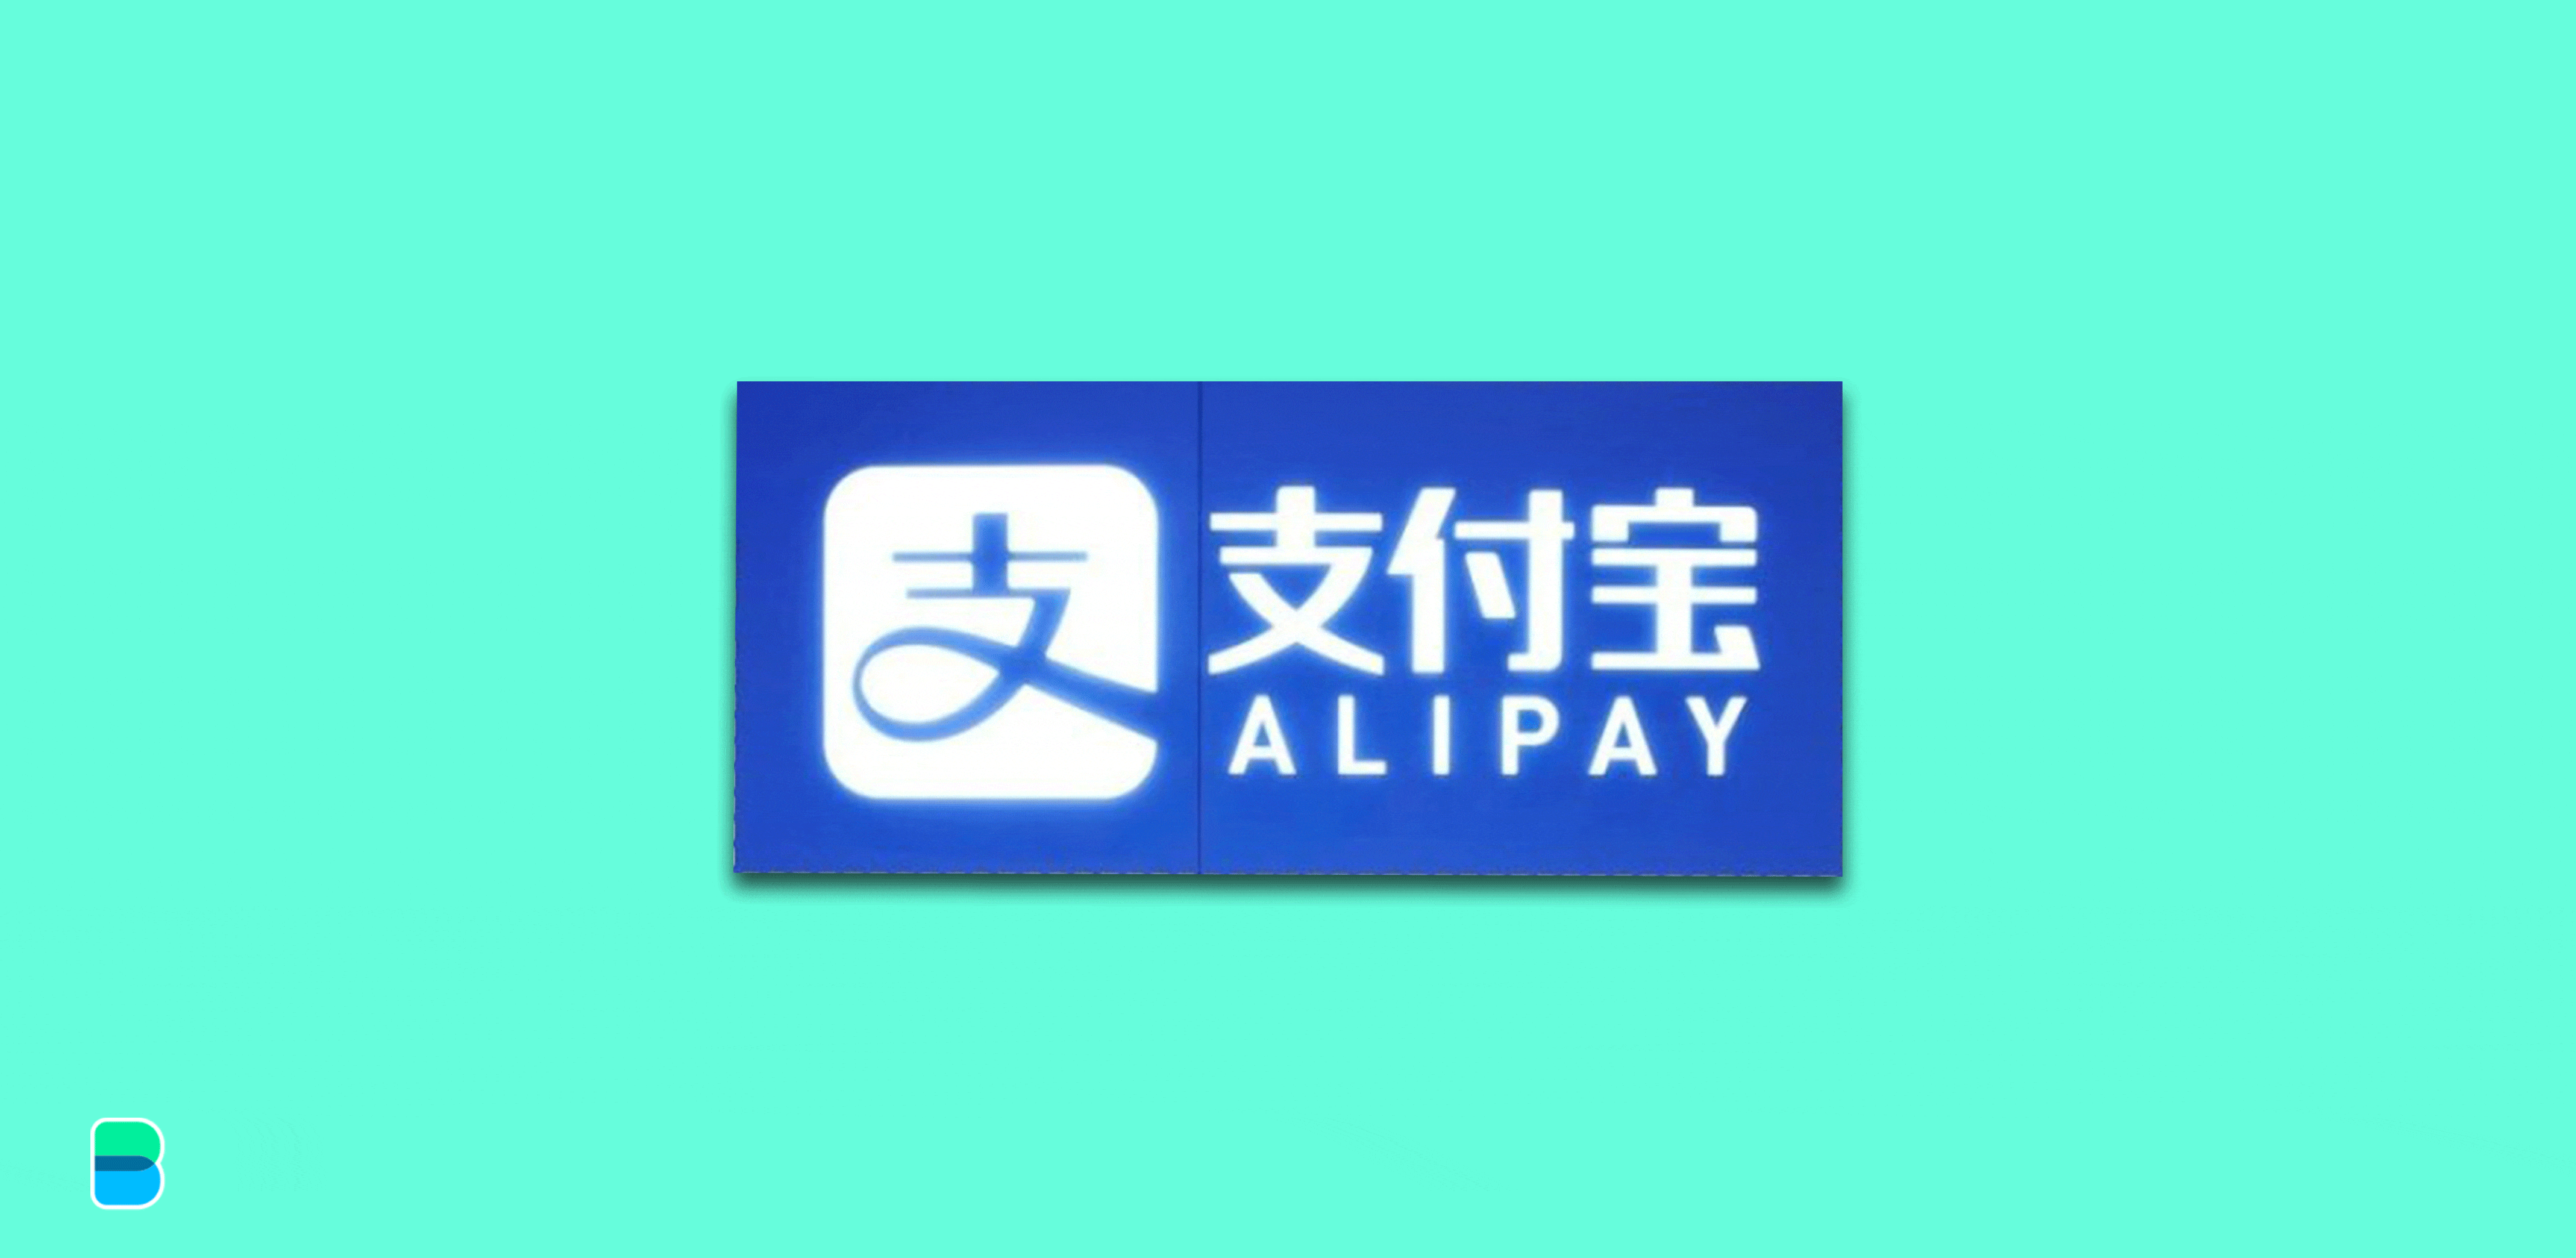 Alipay, not you too!